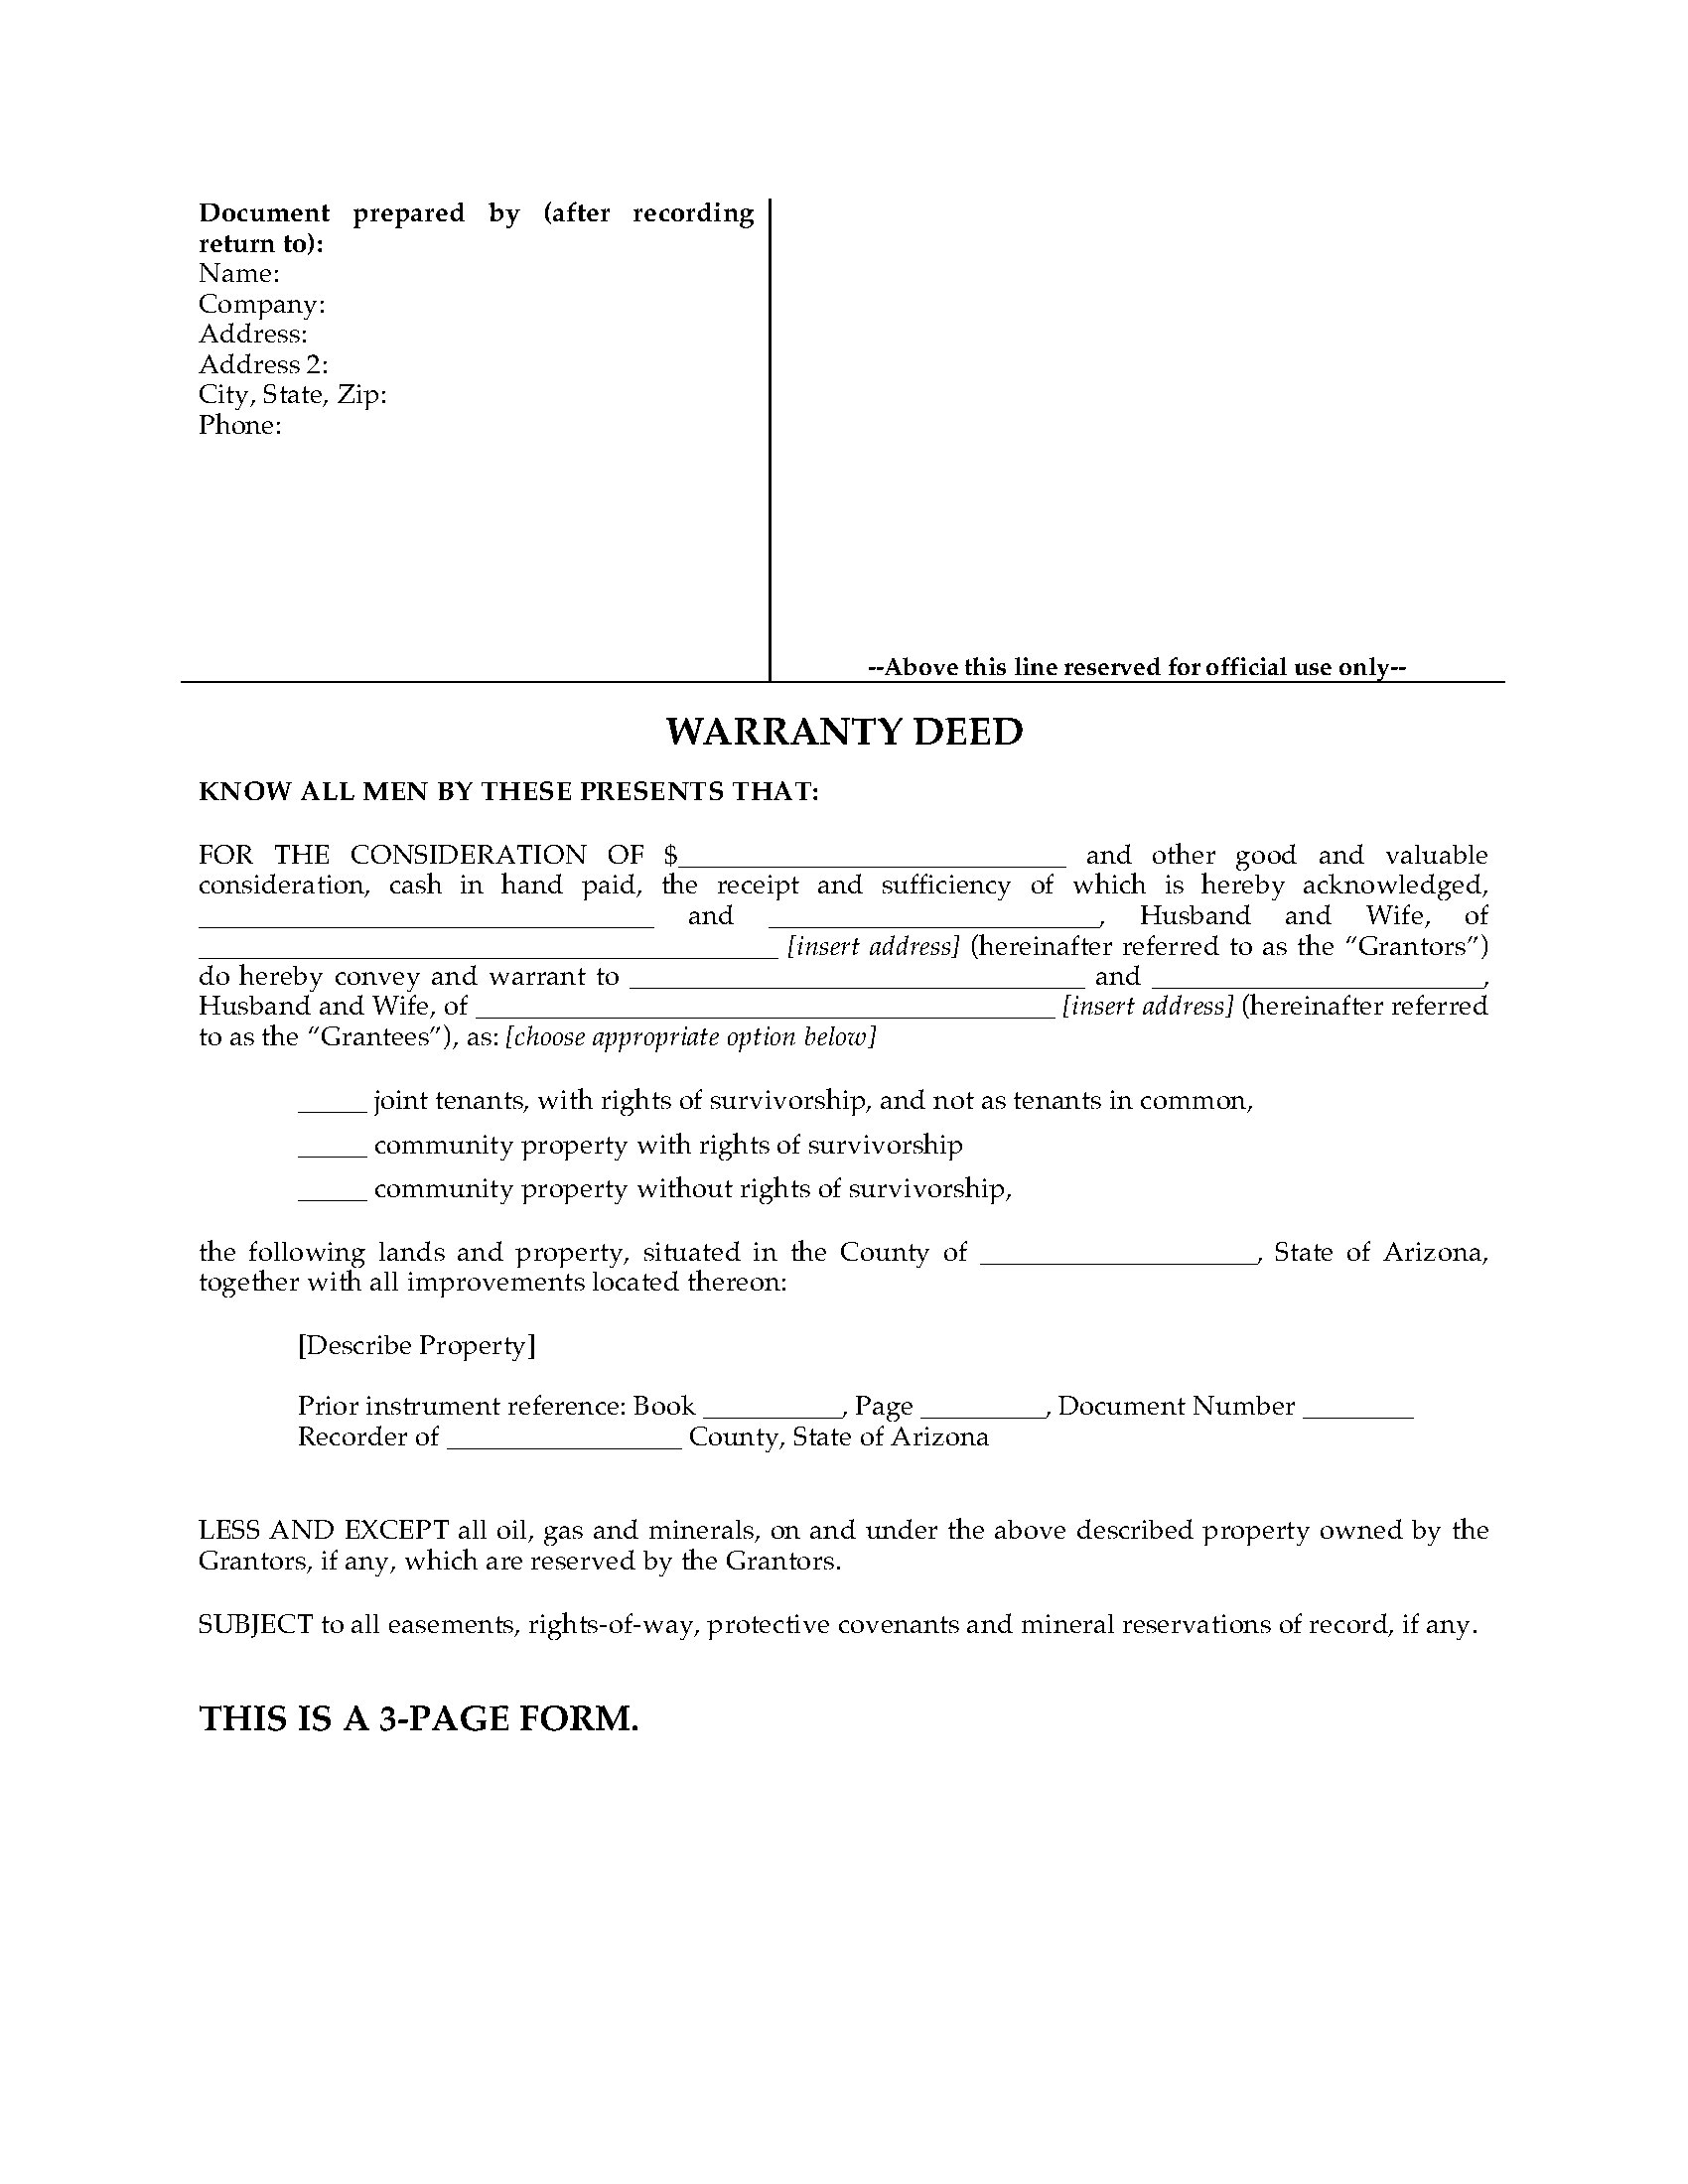 Arizona Warranty Deed For Joint Ownership Legal Forms And Business Templates Megadox Com